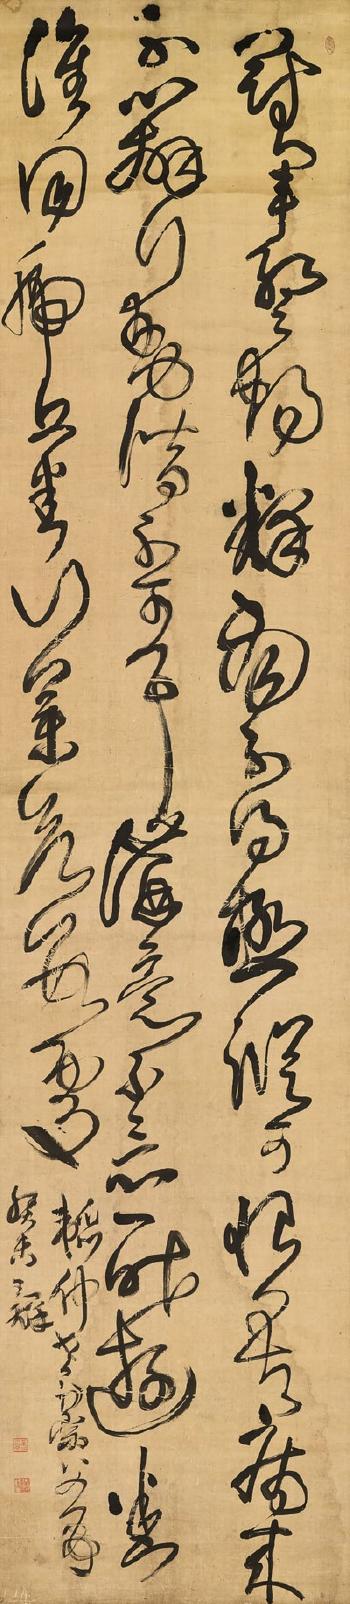 Calligraphy In Cursive Script by 
																	 Wang Duo